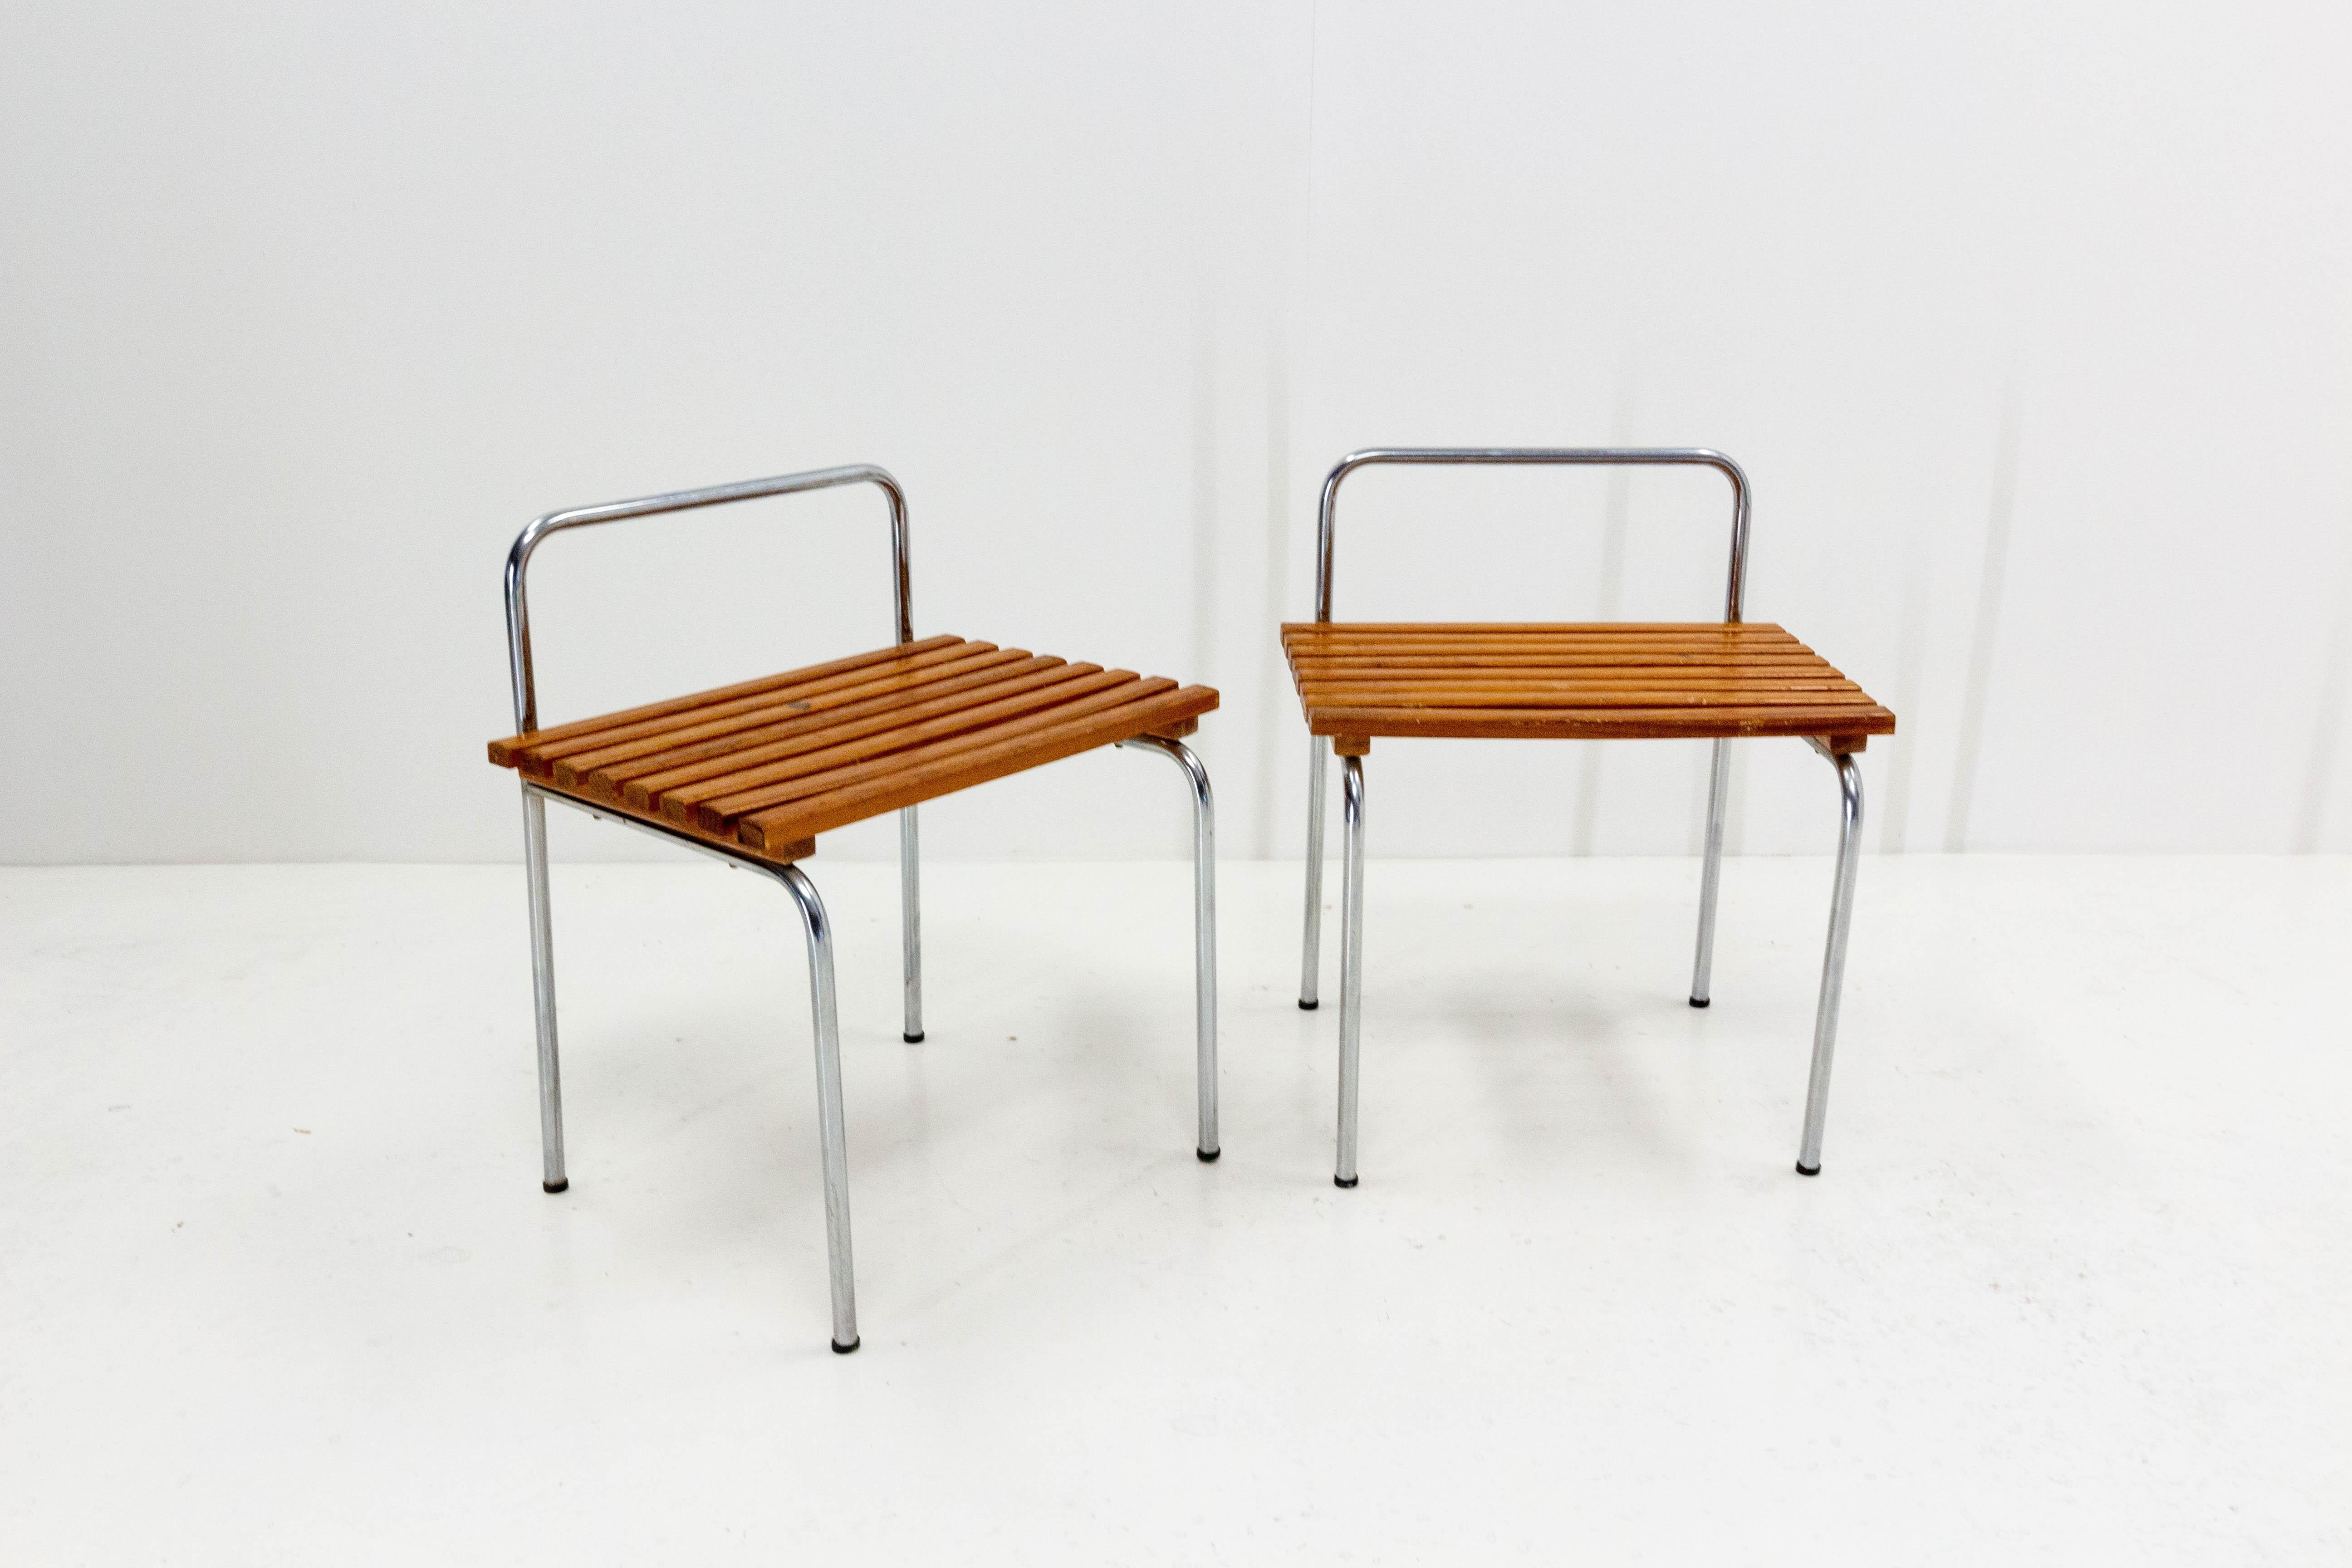 French Charlotte Perriand Modernist Luggage Rack, Tubular Steel, Les Arcs, France, 1950 For Sale